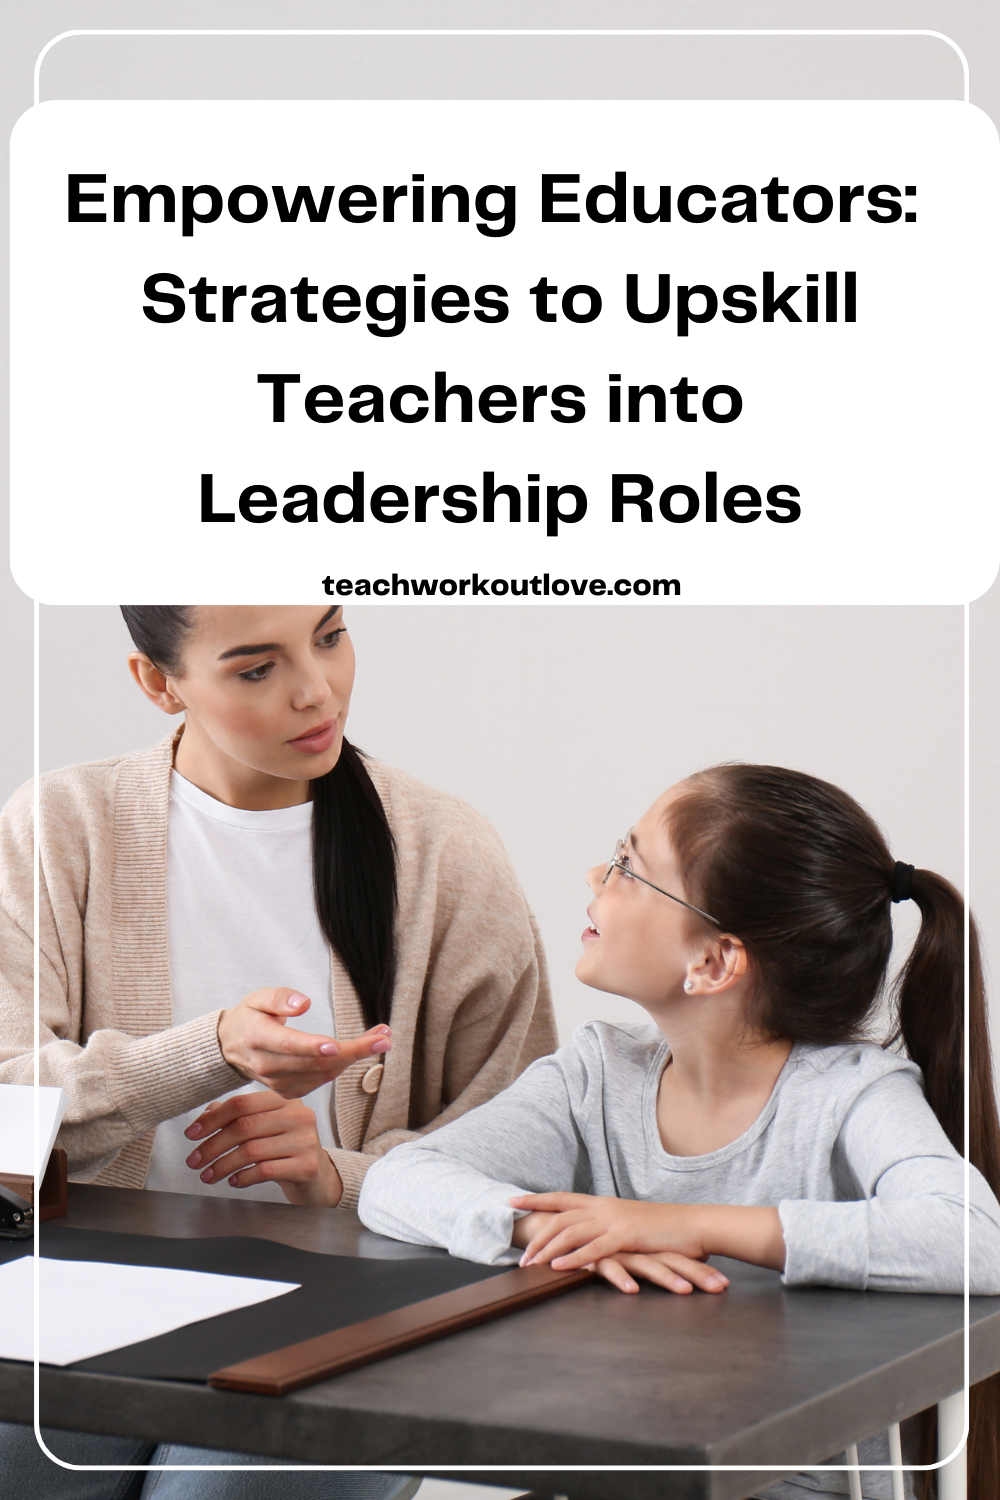 what if there was a way to upgrade teachers’ skills in a way that boosted student outcomes and positively impacted their careers? In this article, we take a look at strategies to upskill teachers into leadership roles.